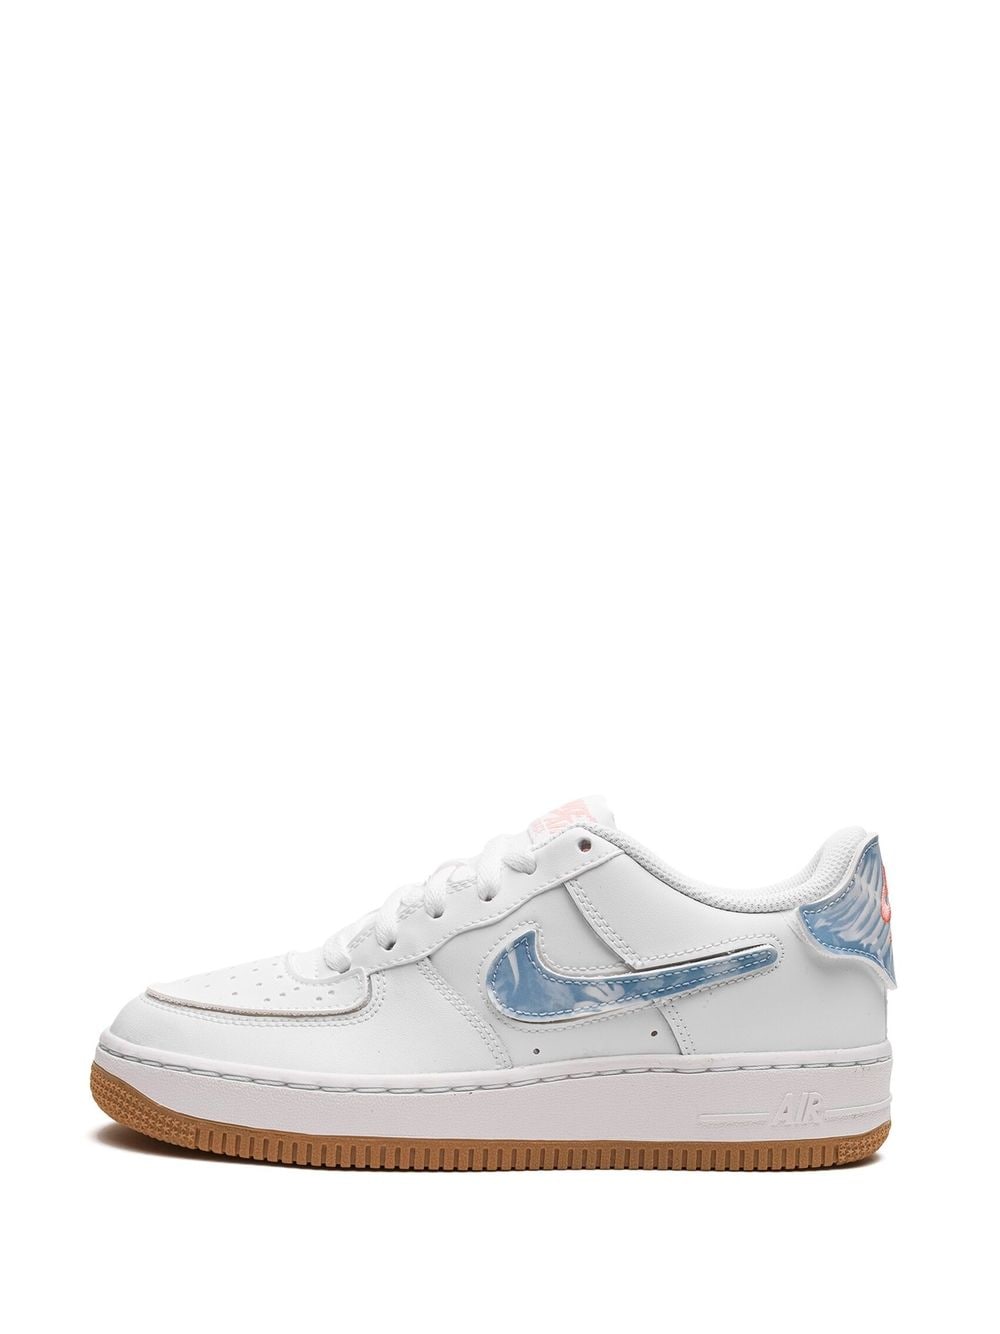 Shop Nike Air Force 1/1 Low Sneakers In White/bleached Coral/eraser Beige/skateboard Blue